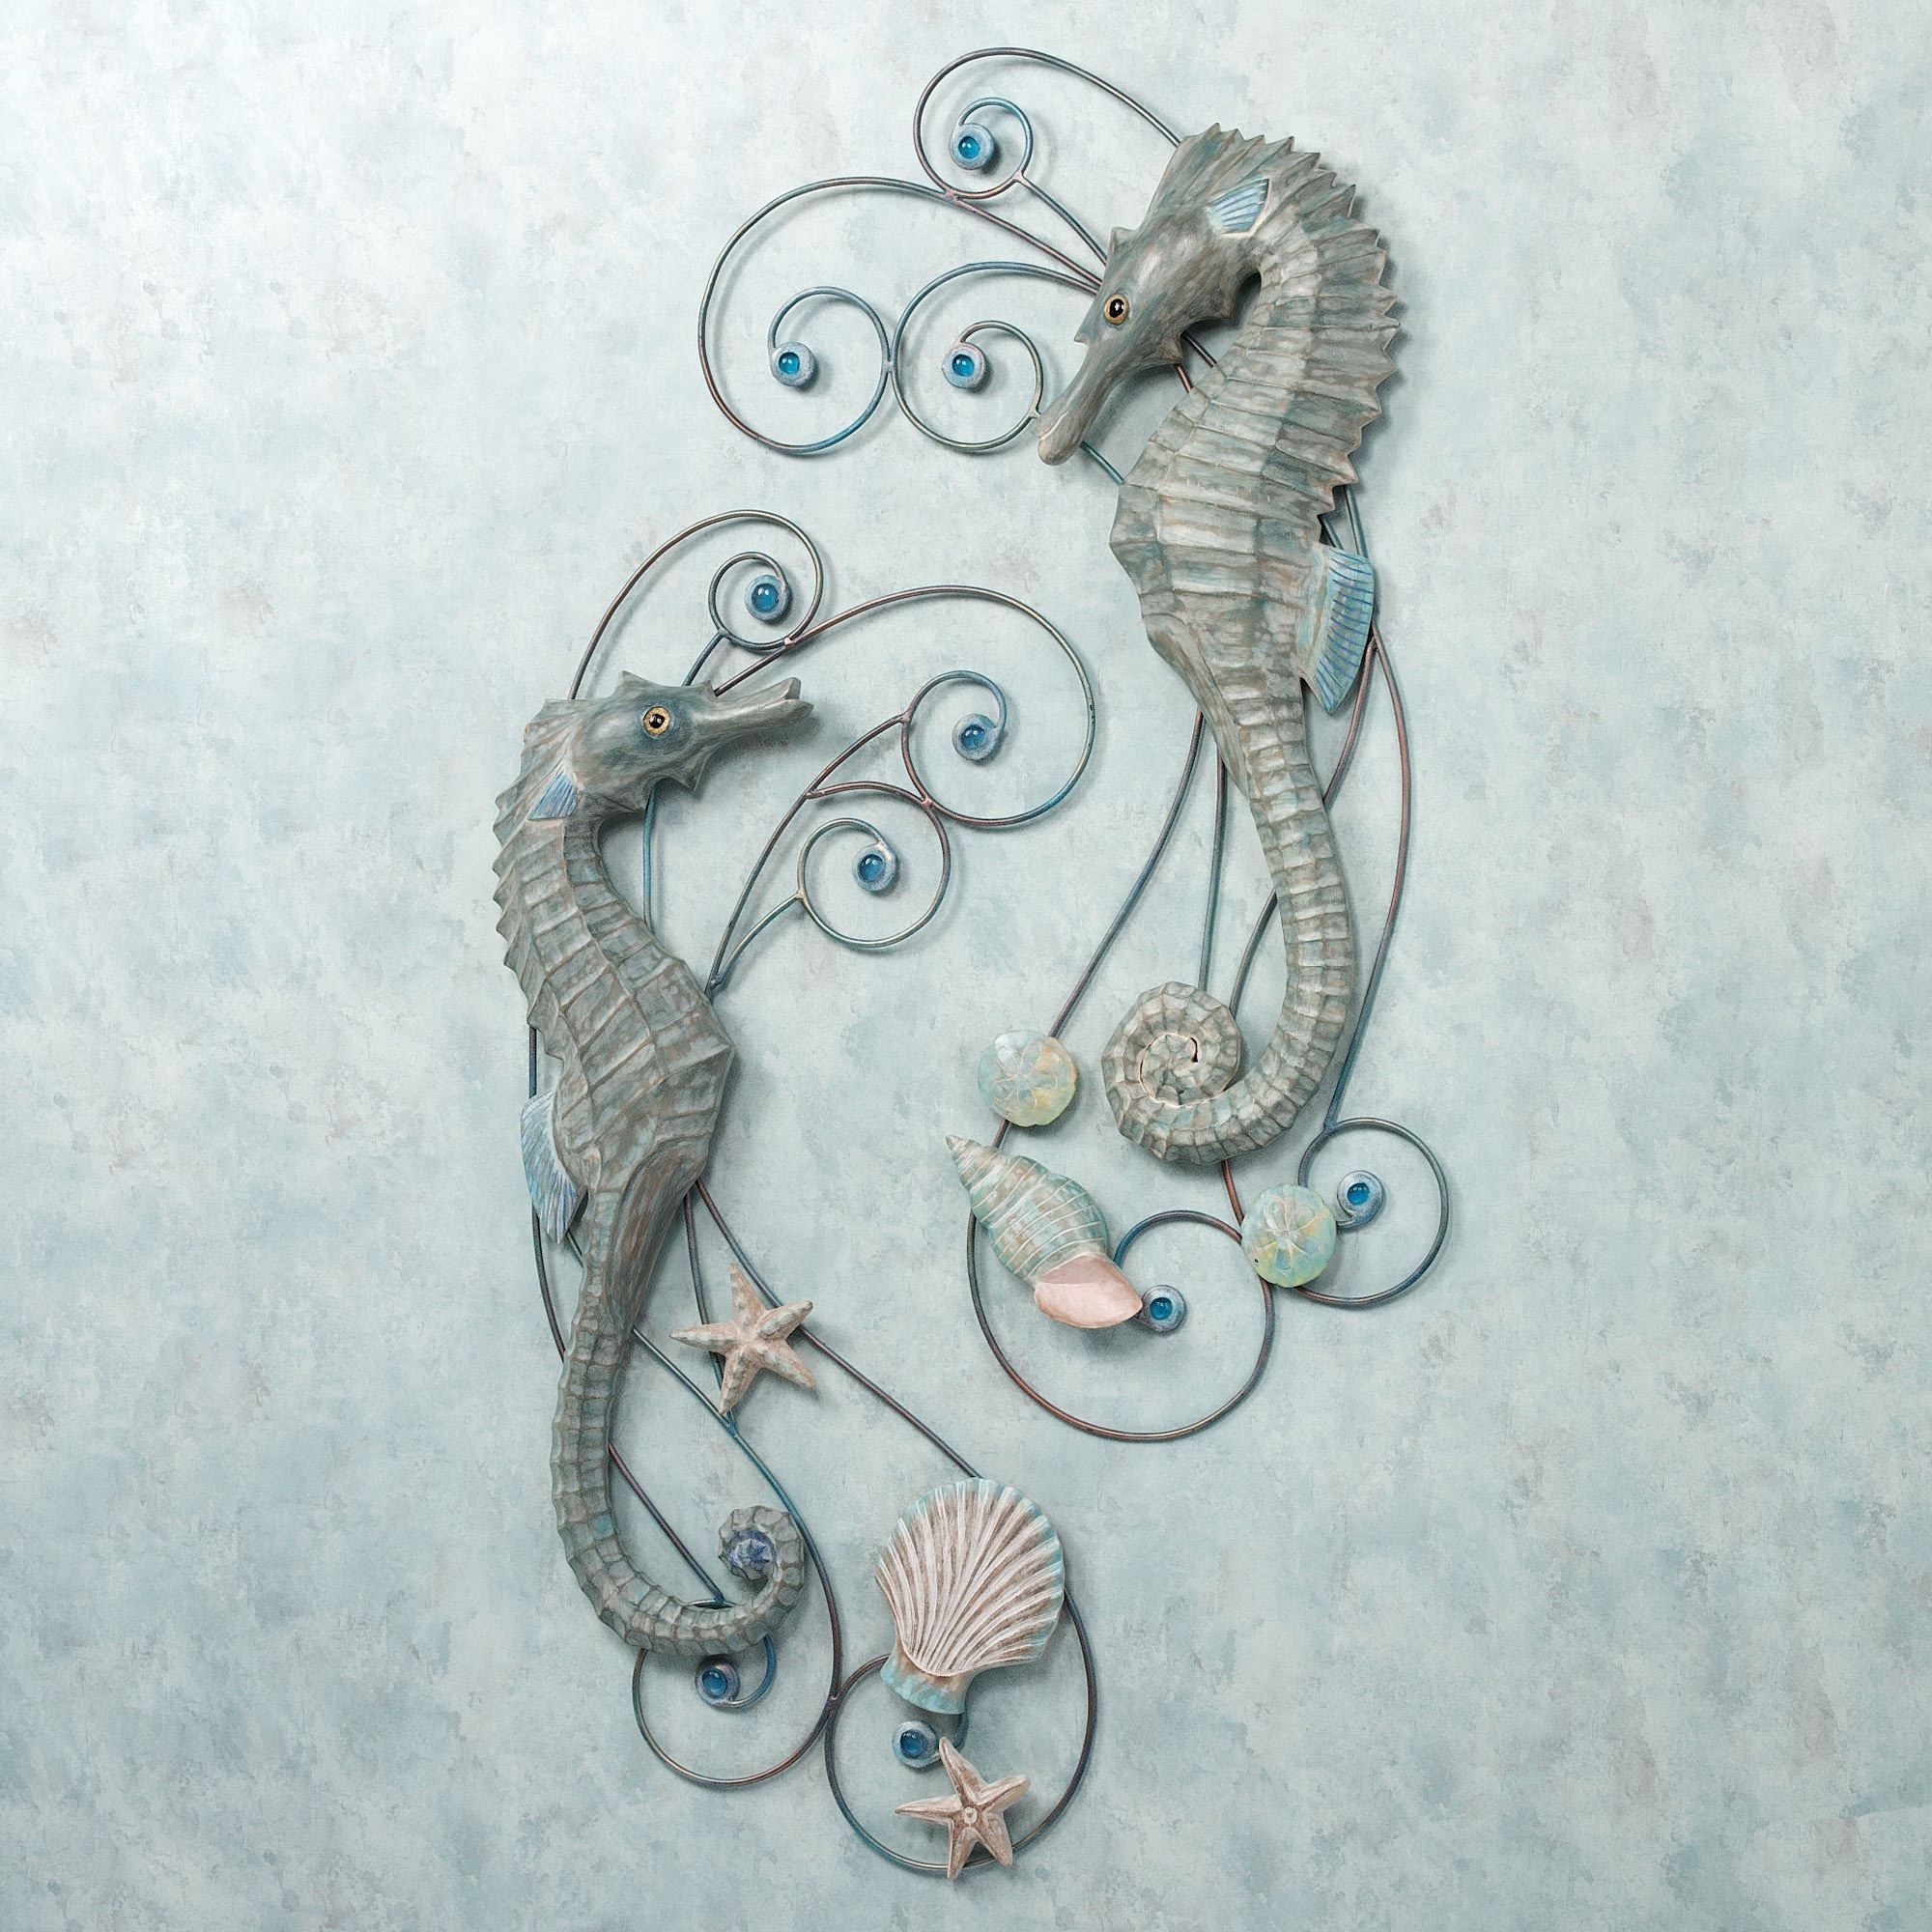 Seahorse Serenade Wall Sculpture Set Intended For Fashionable Sea Horse Wall Art (View 14 of 15)